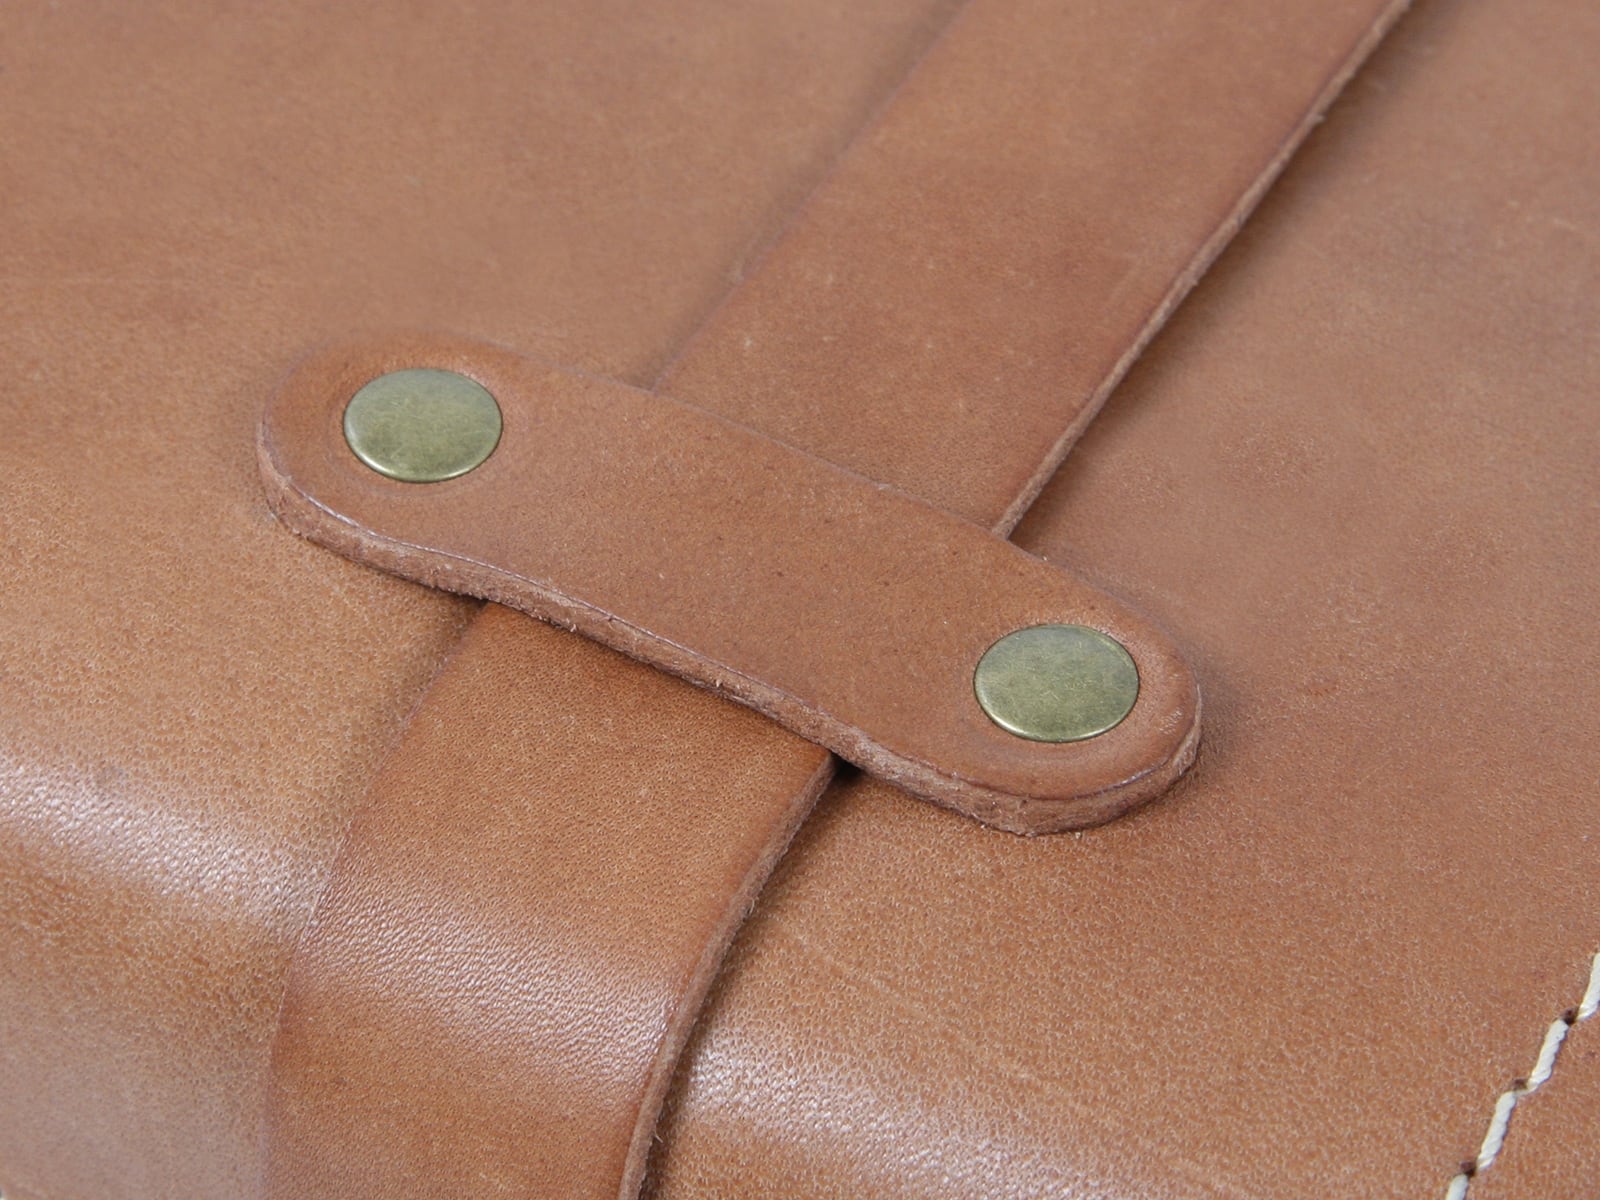 Legacy Rear Bag Leather - sand brown